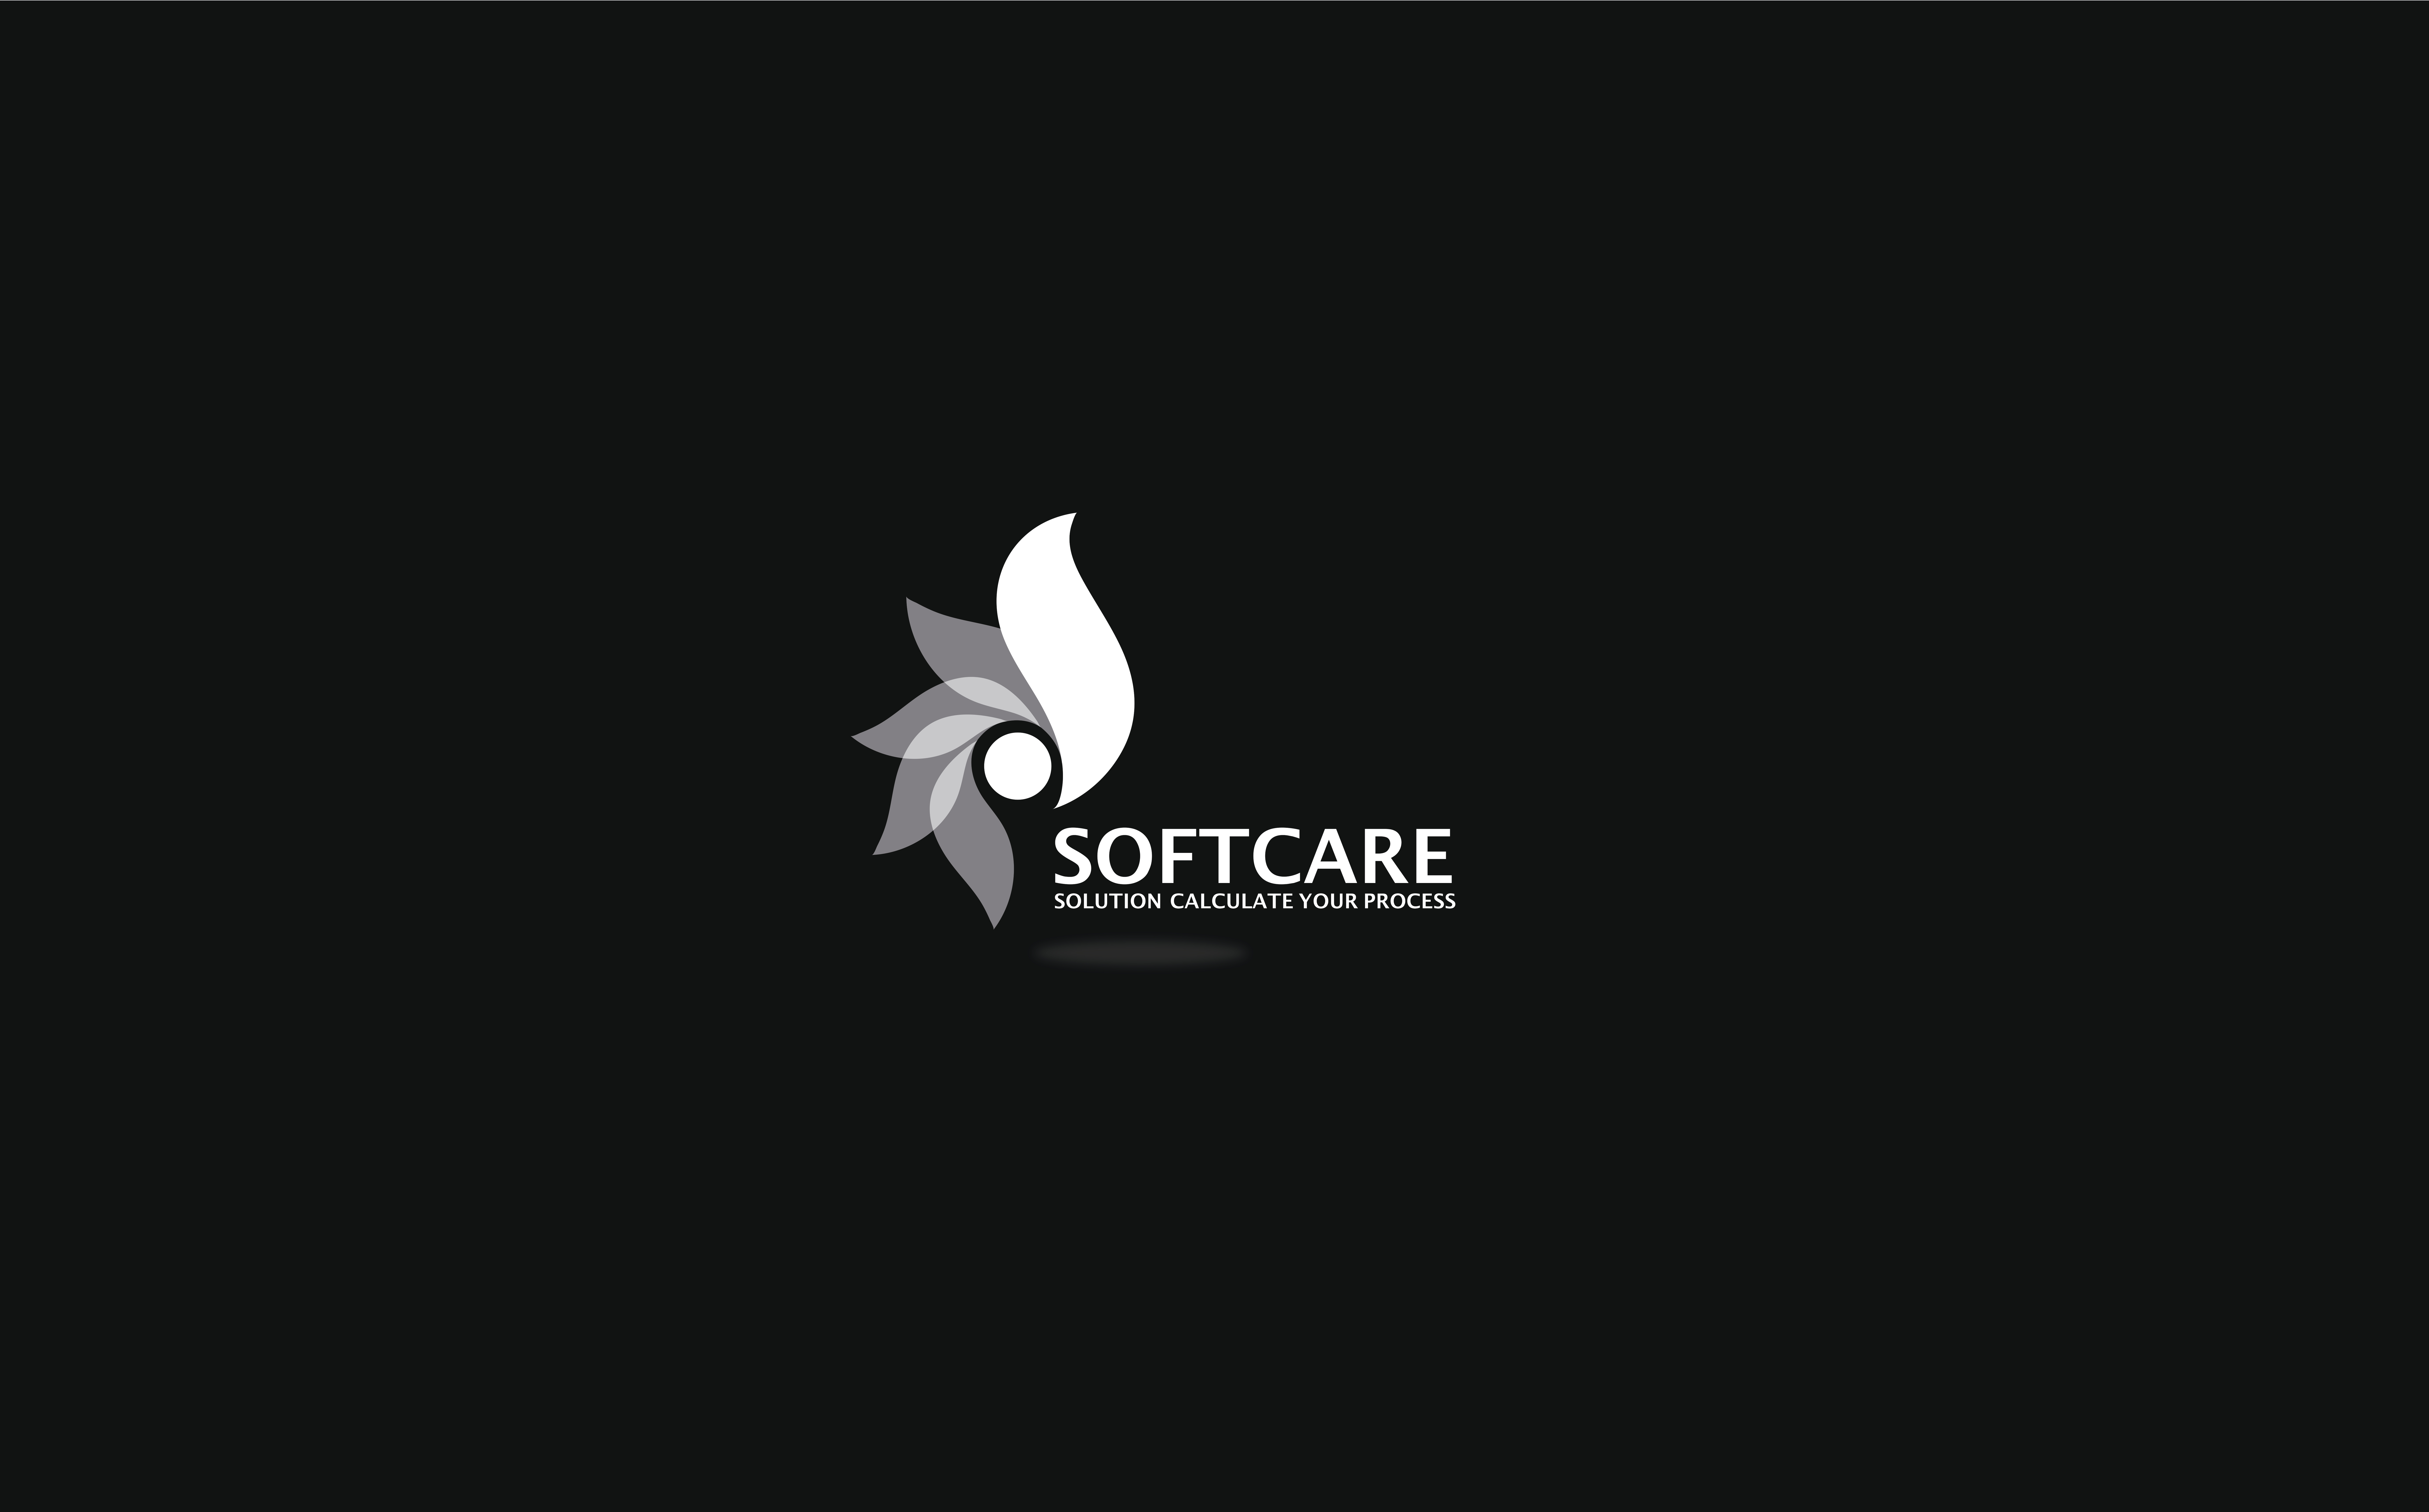 Softcare Solution